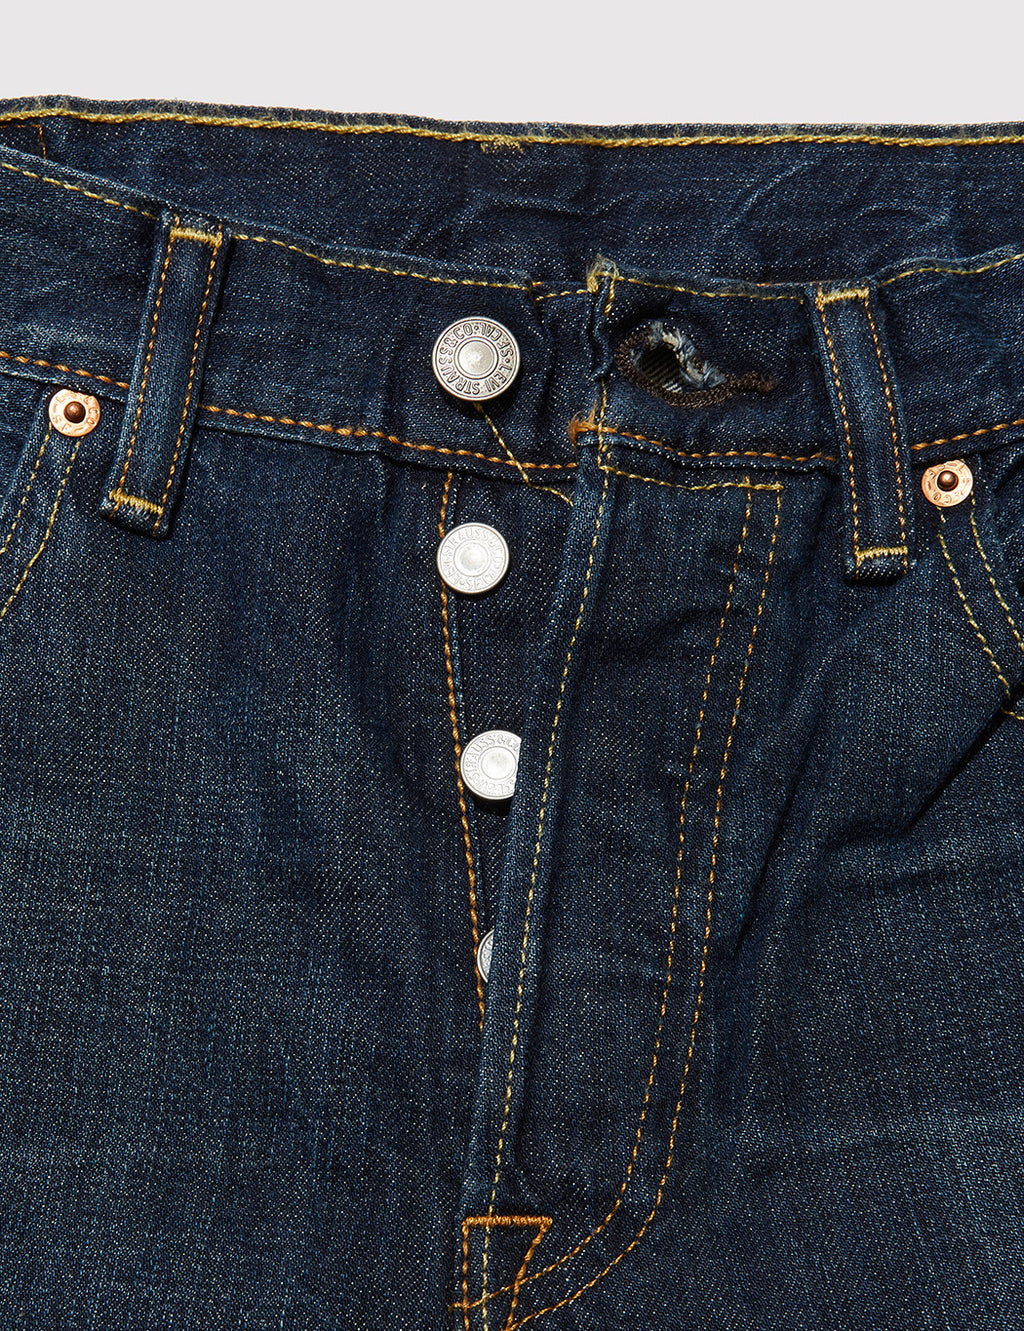 Levis 501 CT Customised Tapered Jeans - The Night Blue | URBAN EXCESS.